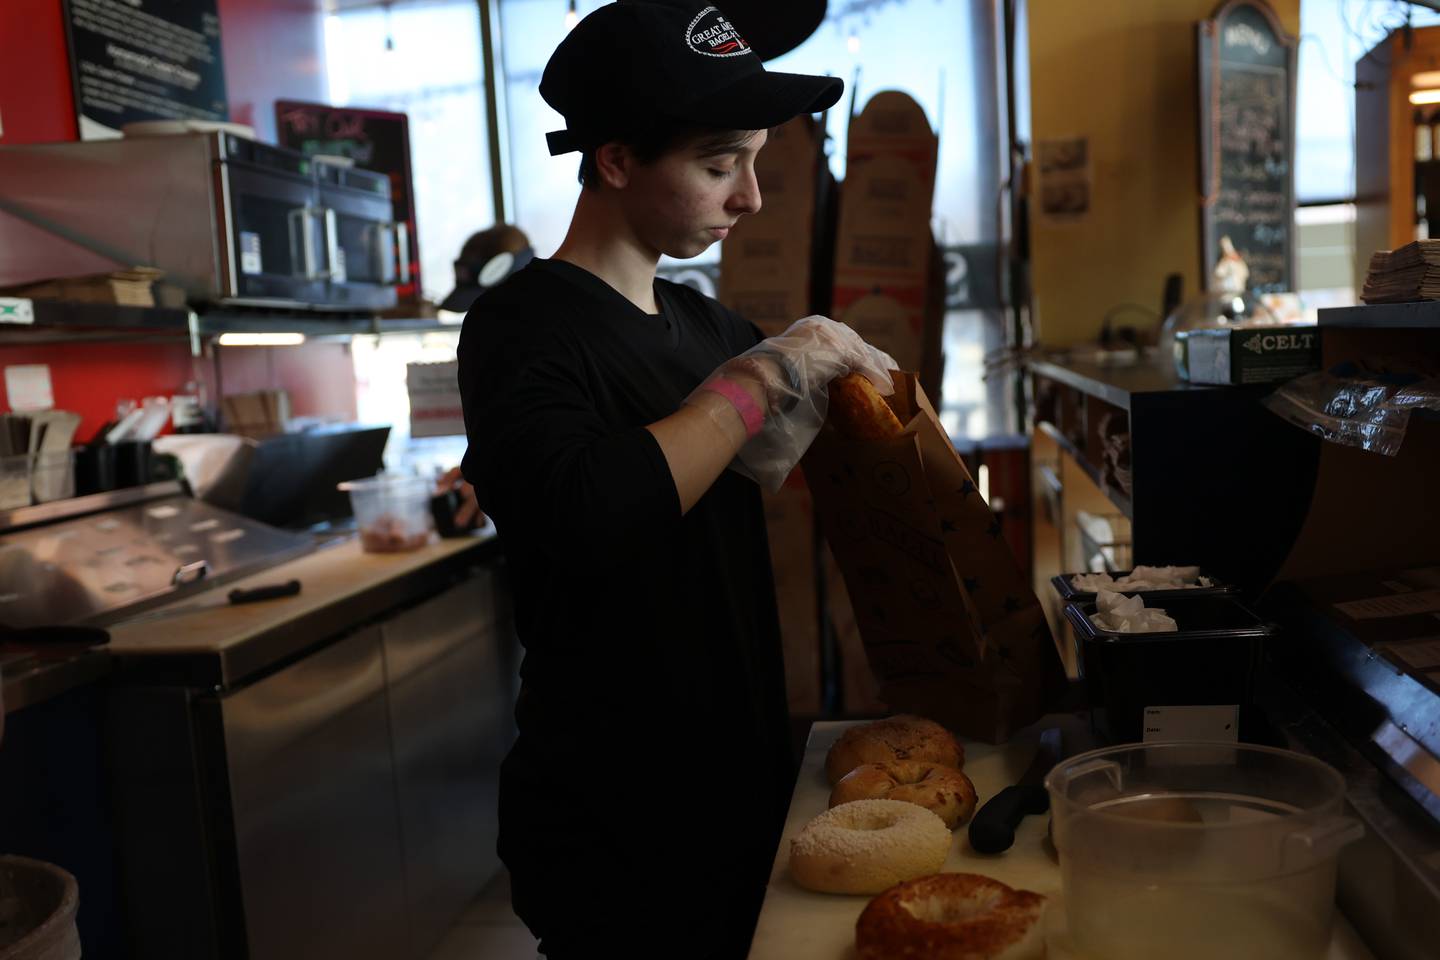 Makayla Vinson puts together an order at Great American Bagel in Joliet.